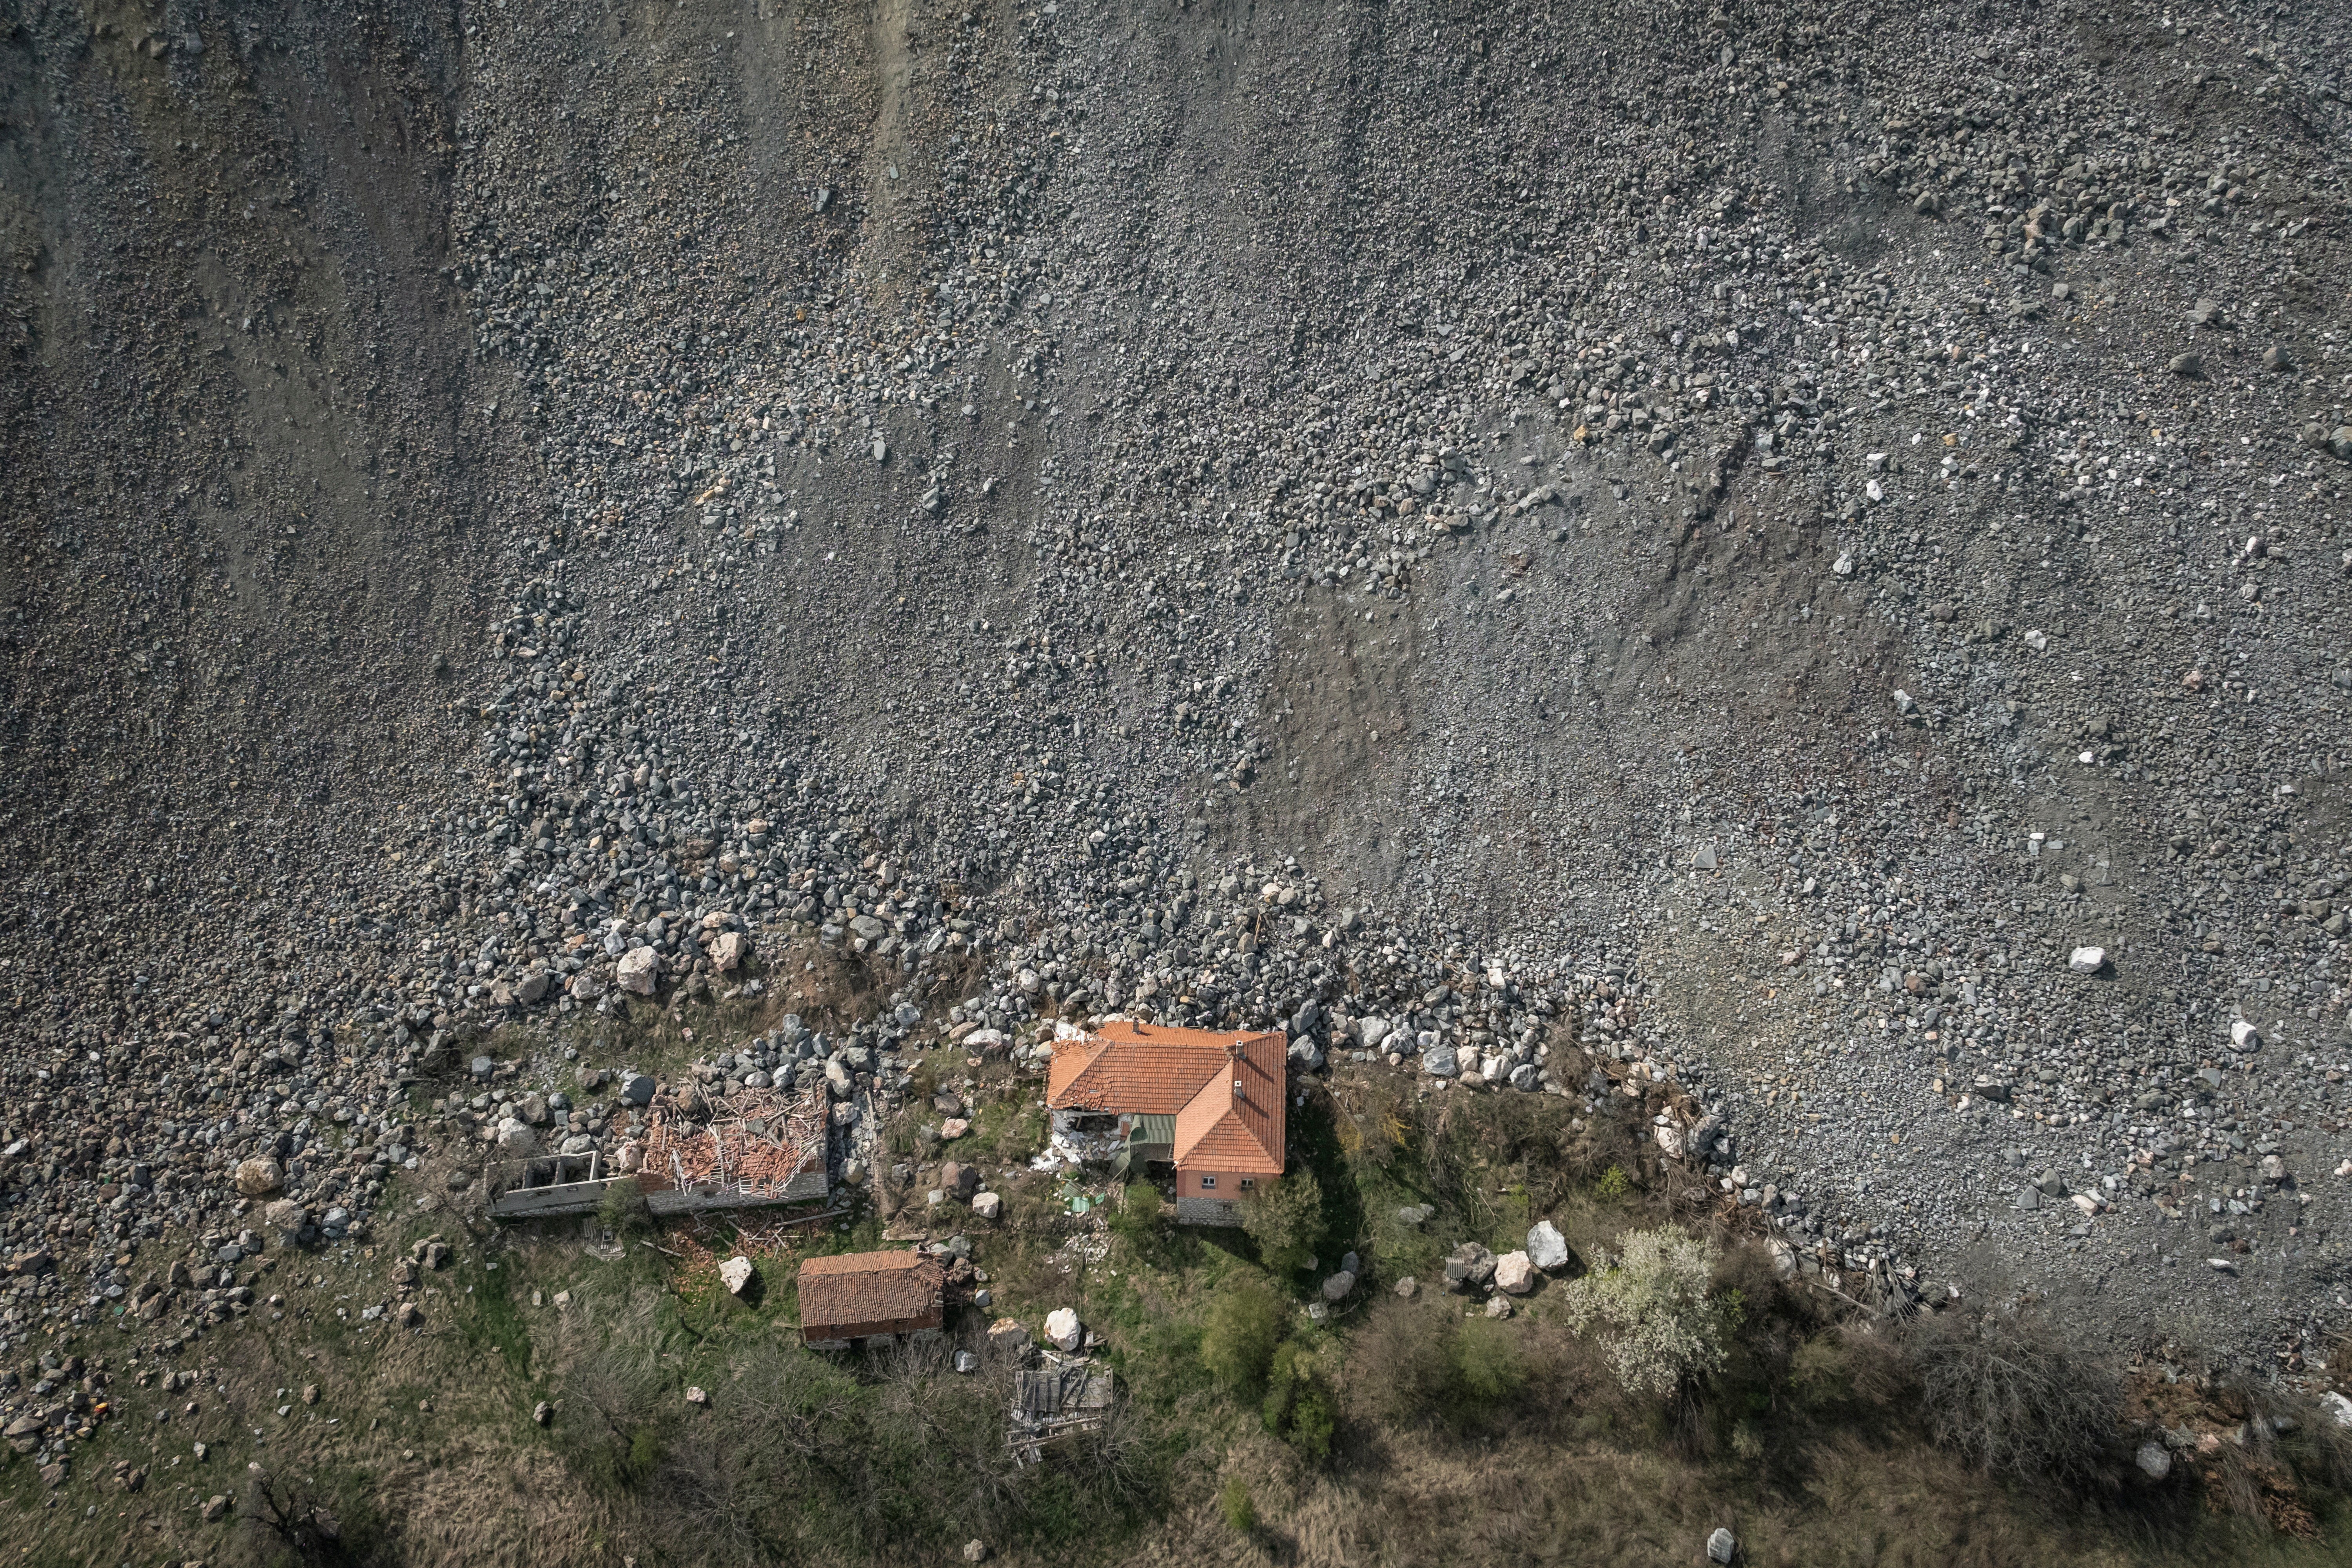 A destroyed house is seen near an open-pit copper mine